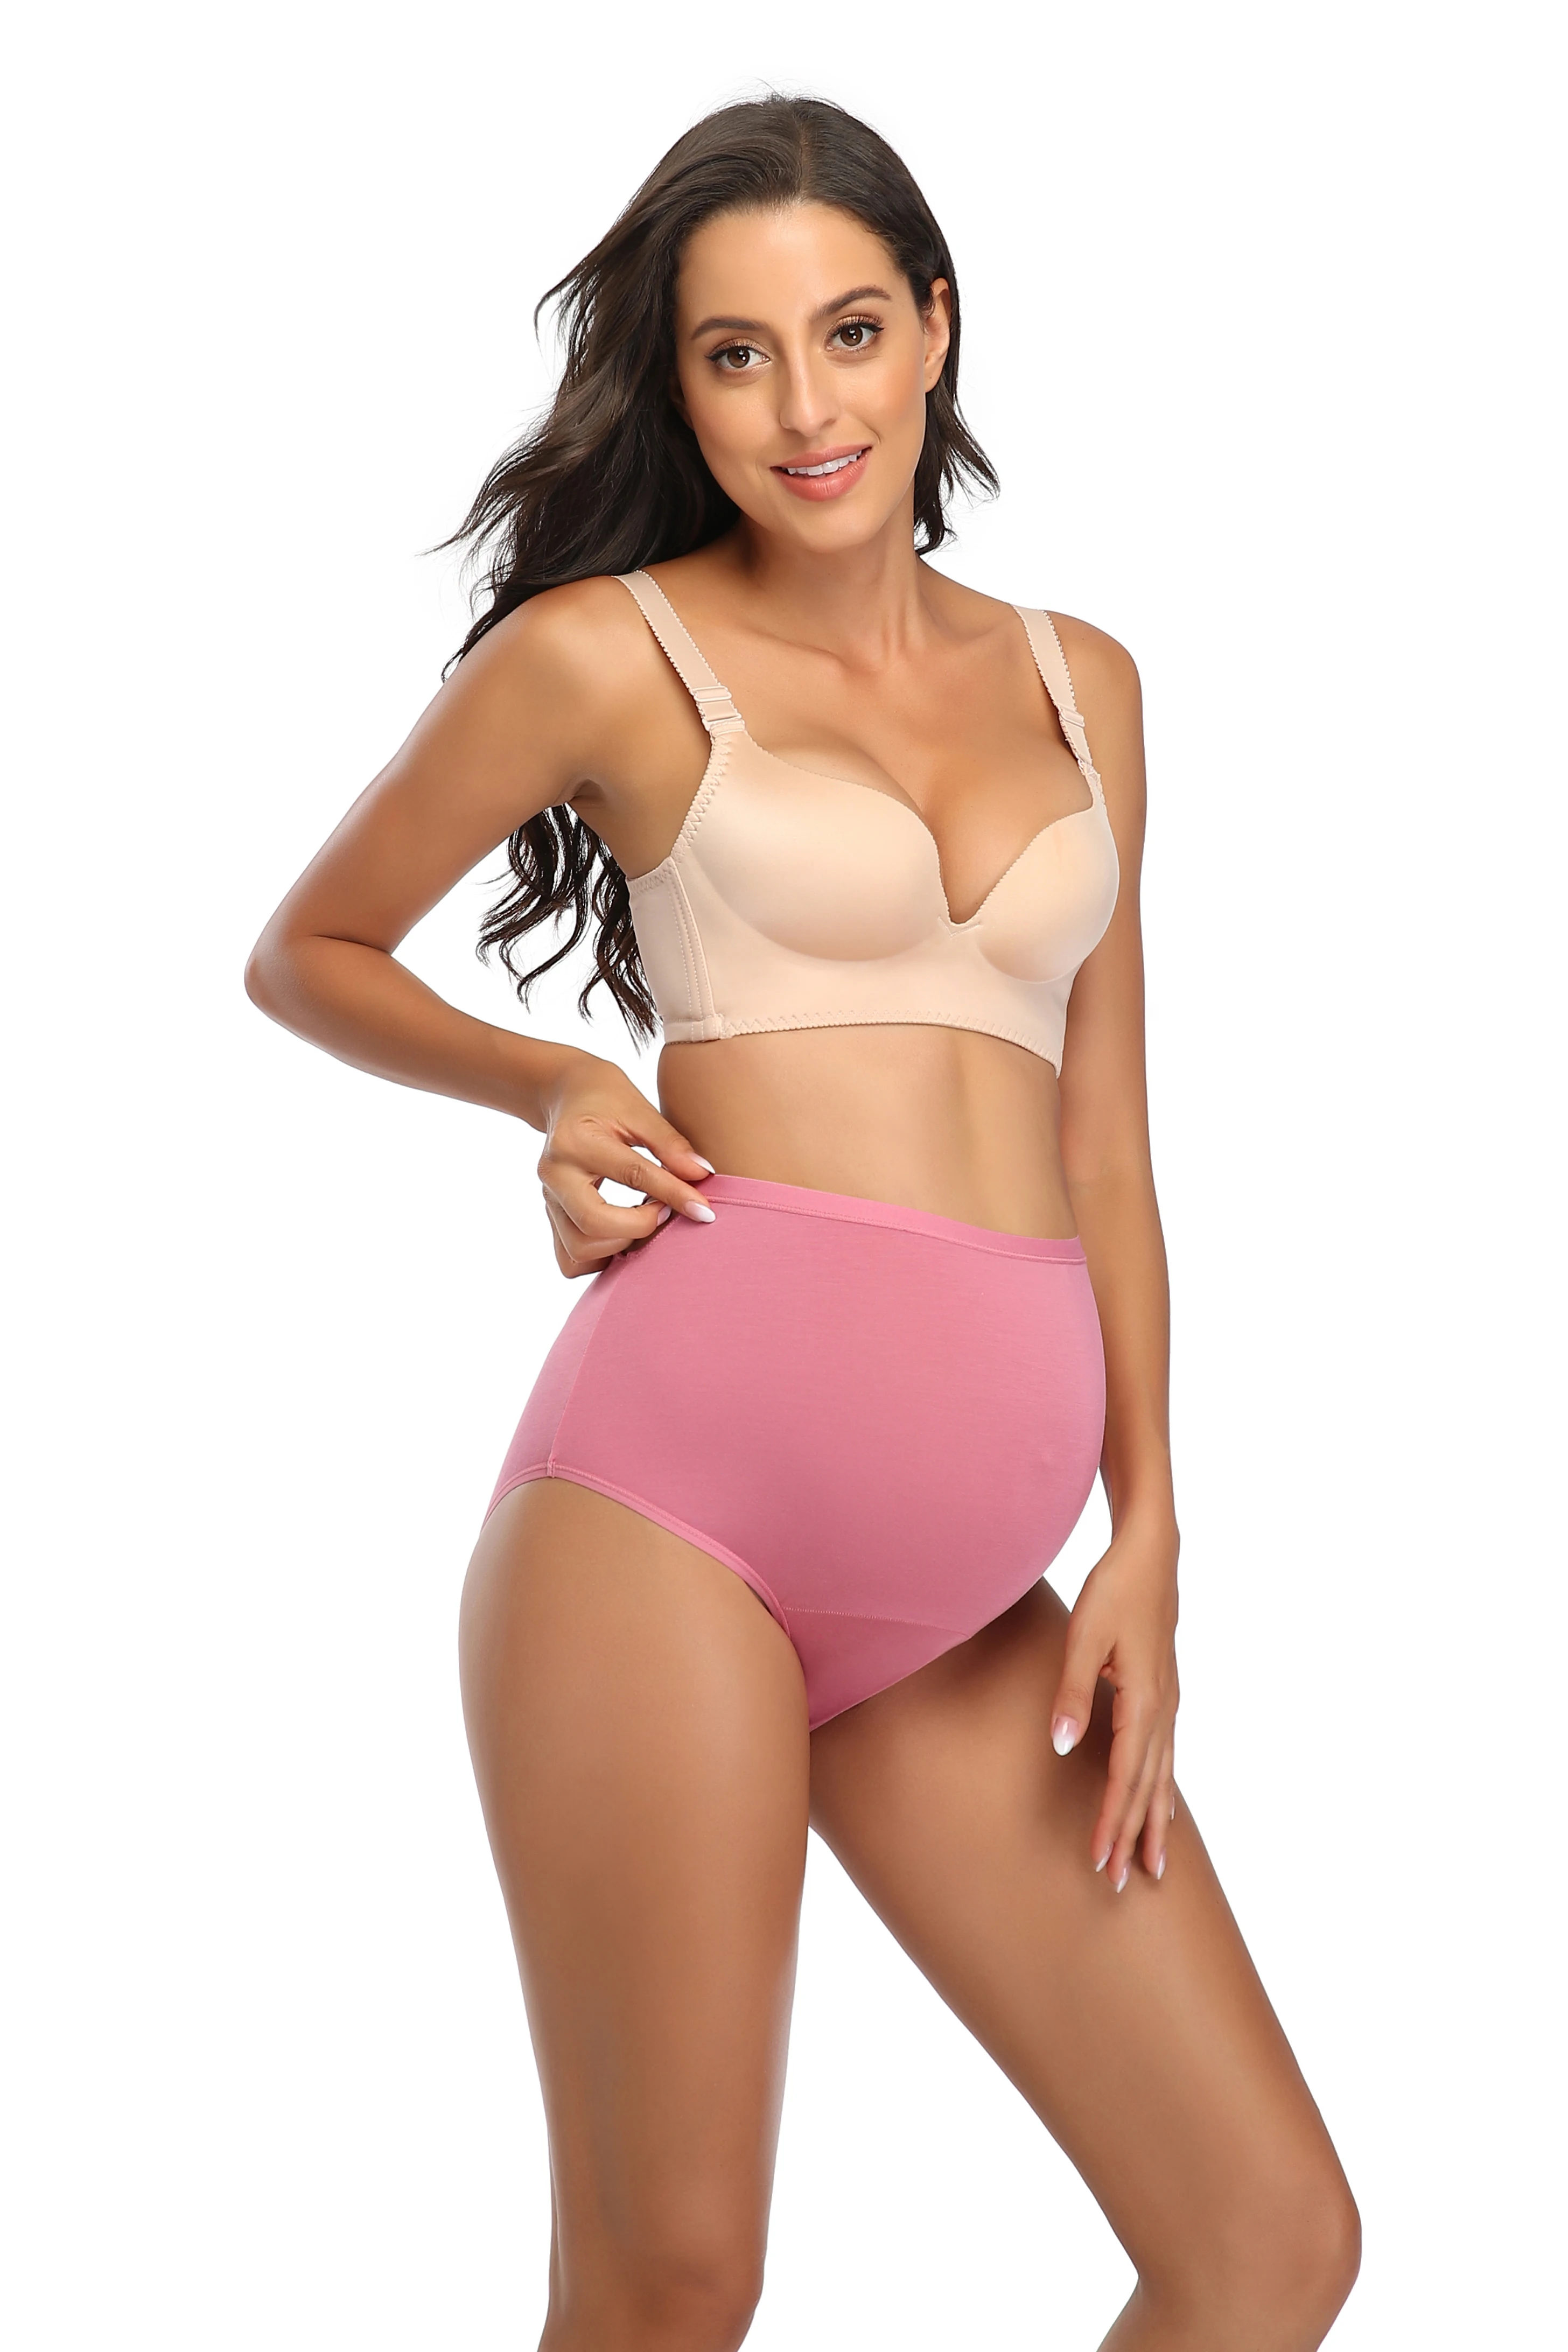 AnuirheiH Pregnant Women's Underwear With High Waist And Belly Support  Panties Sale Clearance